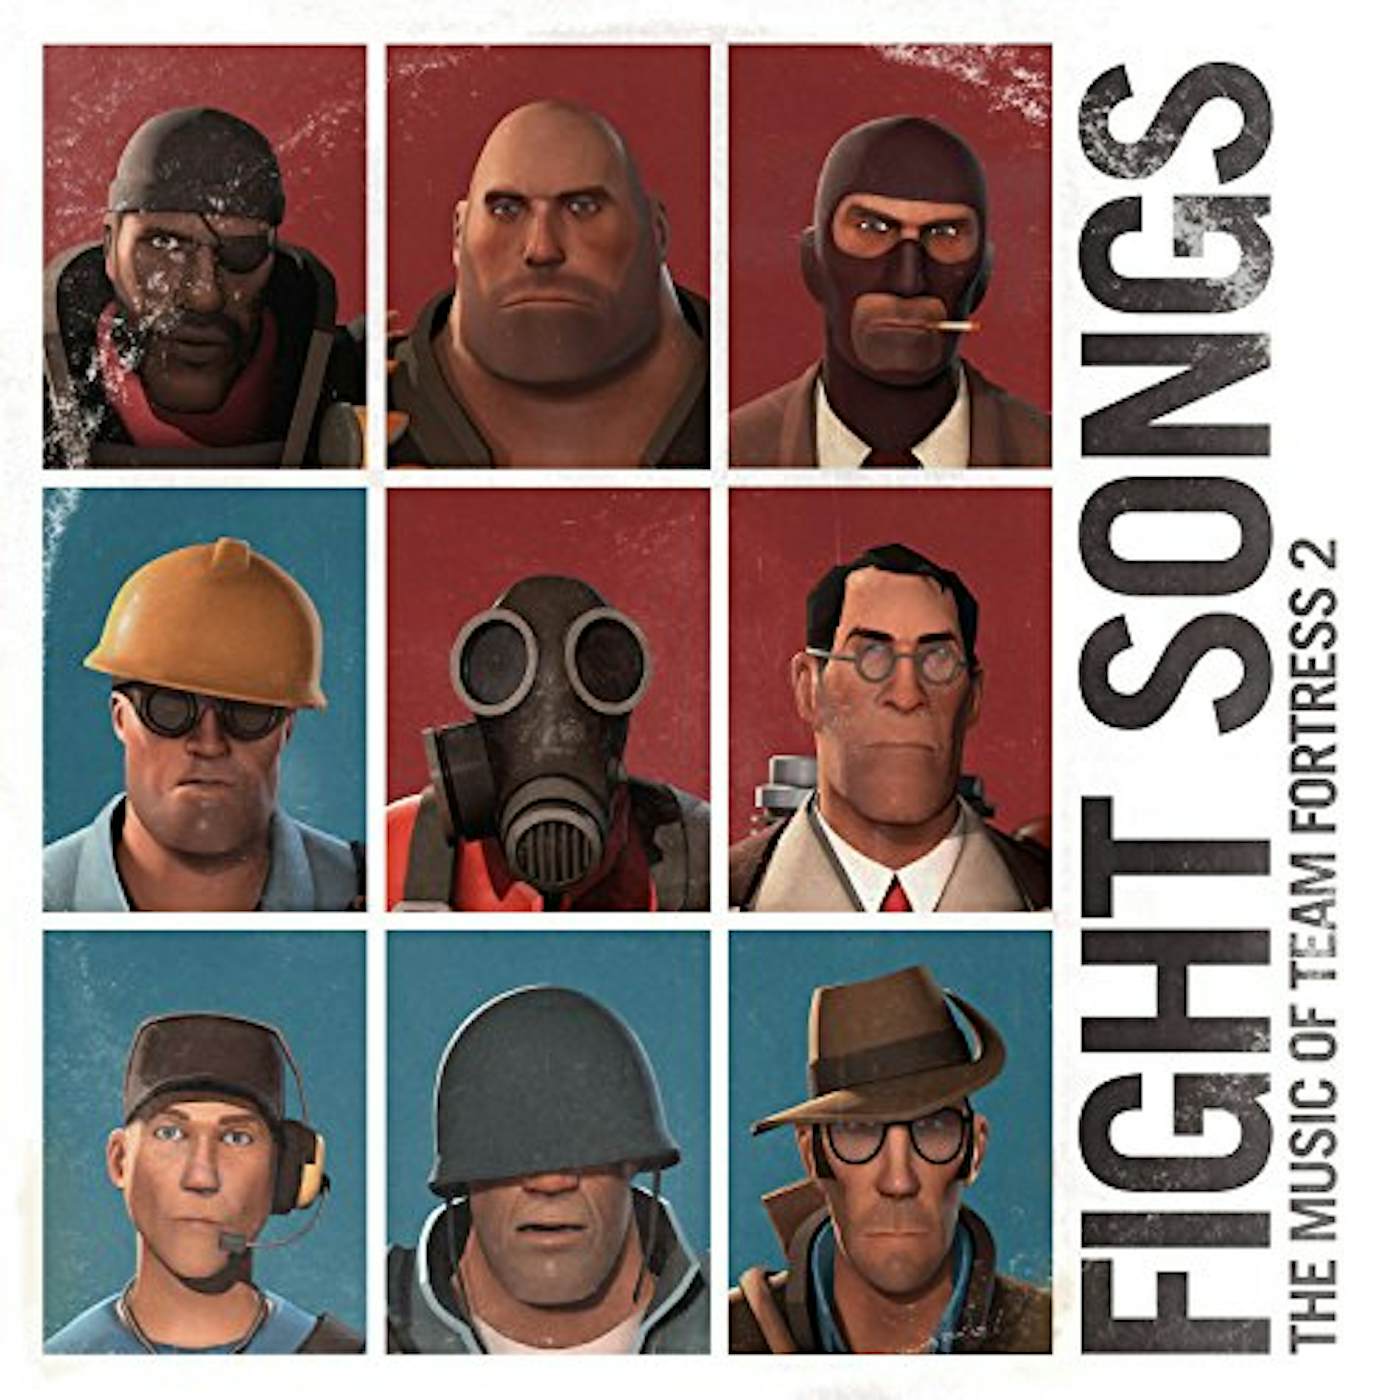 Valve Studio Orchestra FIGHT SONGS: THE MUSIC OF TEAM FORTRESS 2 CD